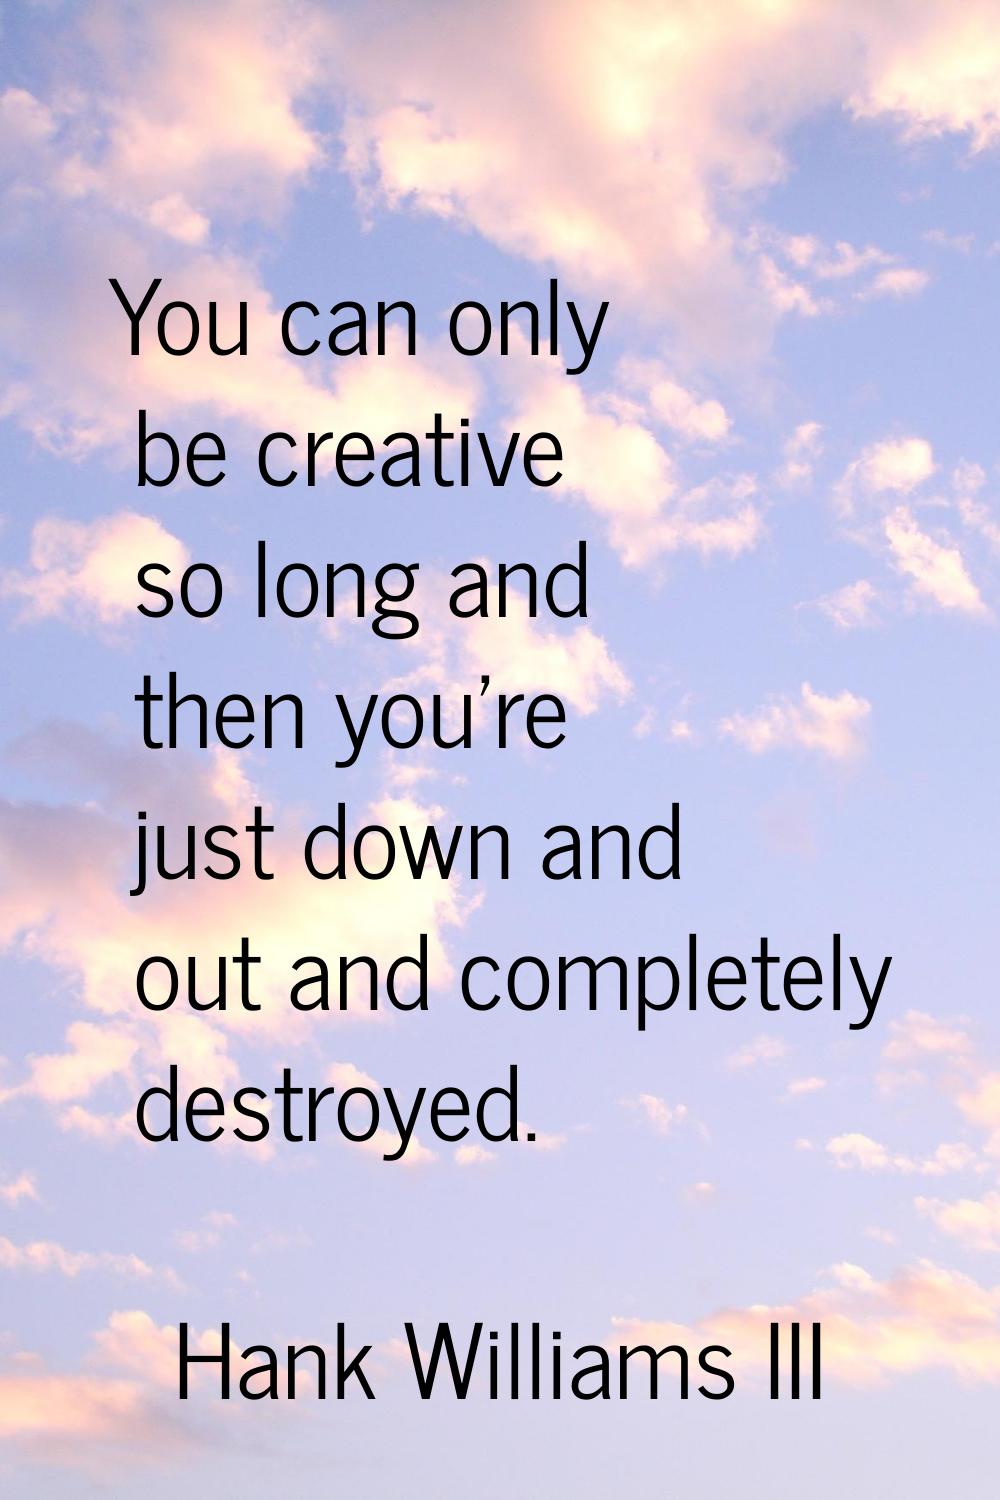 You can only be creative so long and then you're just down and out and completely destroyed.